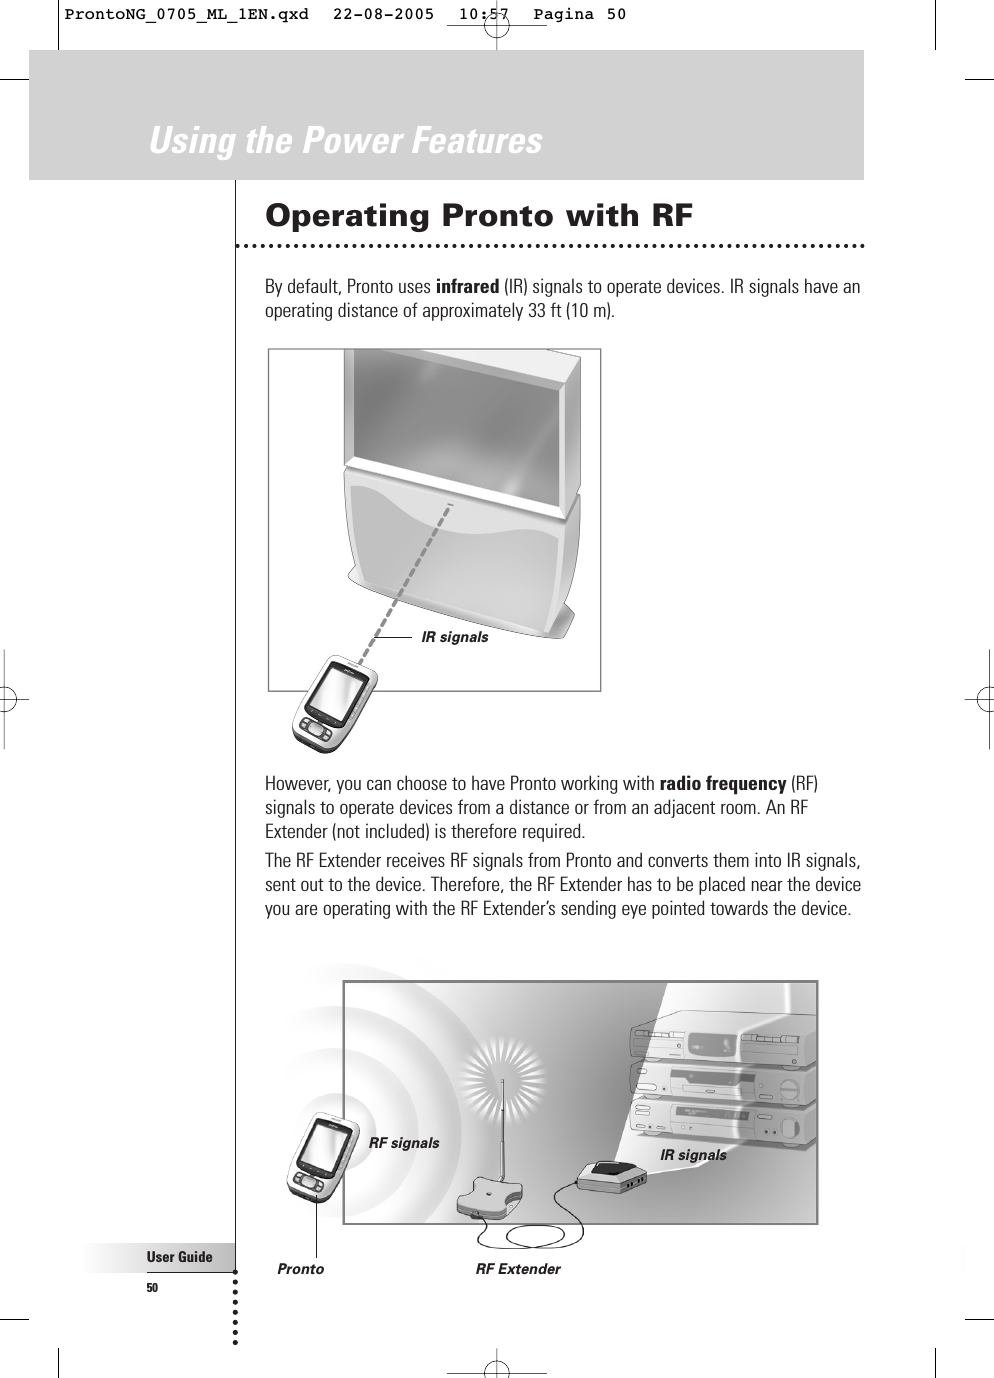 User Guide50Using the Power FeaturesOperating Pronto with RFBy default, Pronto uses infrared (IR) signals to operate devices. IR signals have anoperating distance of approximately 33 ft (10 m).However, you can choose to have Pronto working with radio frequency (RF)signals to operate devices from a distance or from an adjacent room. An RFExtender (not included) is therefore required.The RF Extender receives RF signals from Pronto and converts them into IR signals,sent out to the device. Therefore, the RF Extender has to be placed near the deviceyou are operating with the RF Extender’s sending eye pointed towards the device.IR signalsPronto RF ExtenderRF signals IR signalsProntoNG_0705_ML_1EN.qxd  22-08-2005  10:57  Pagina 50